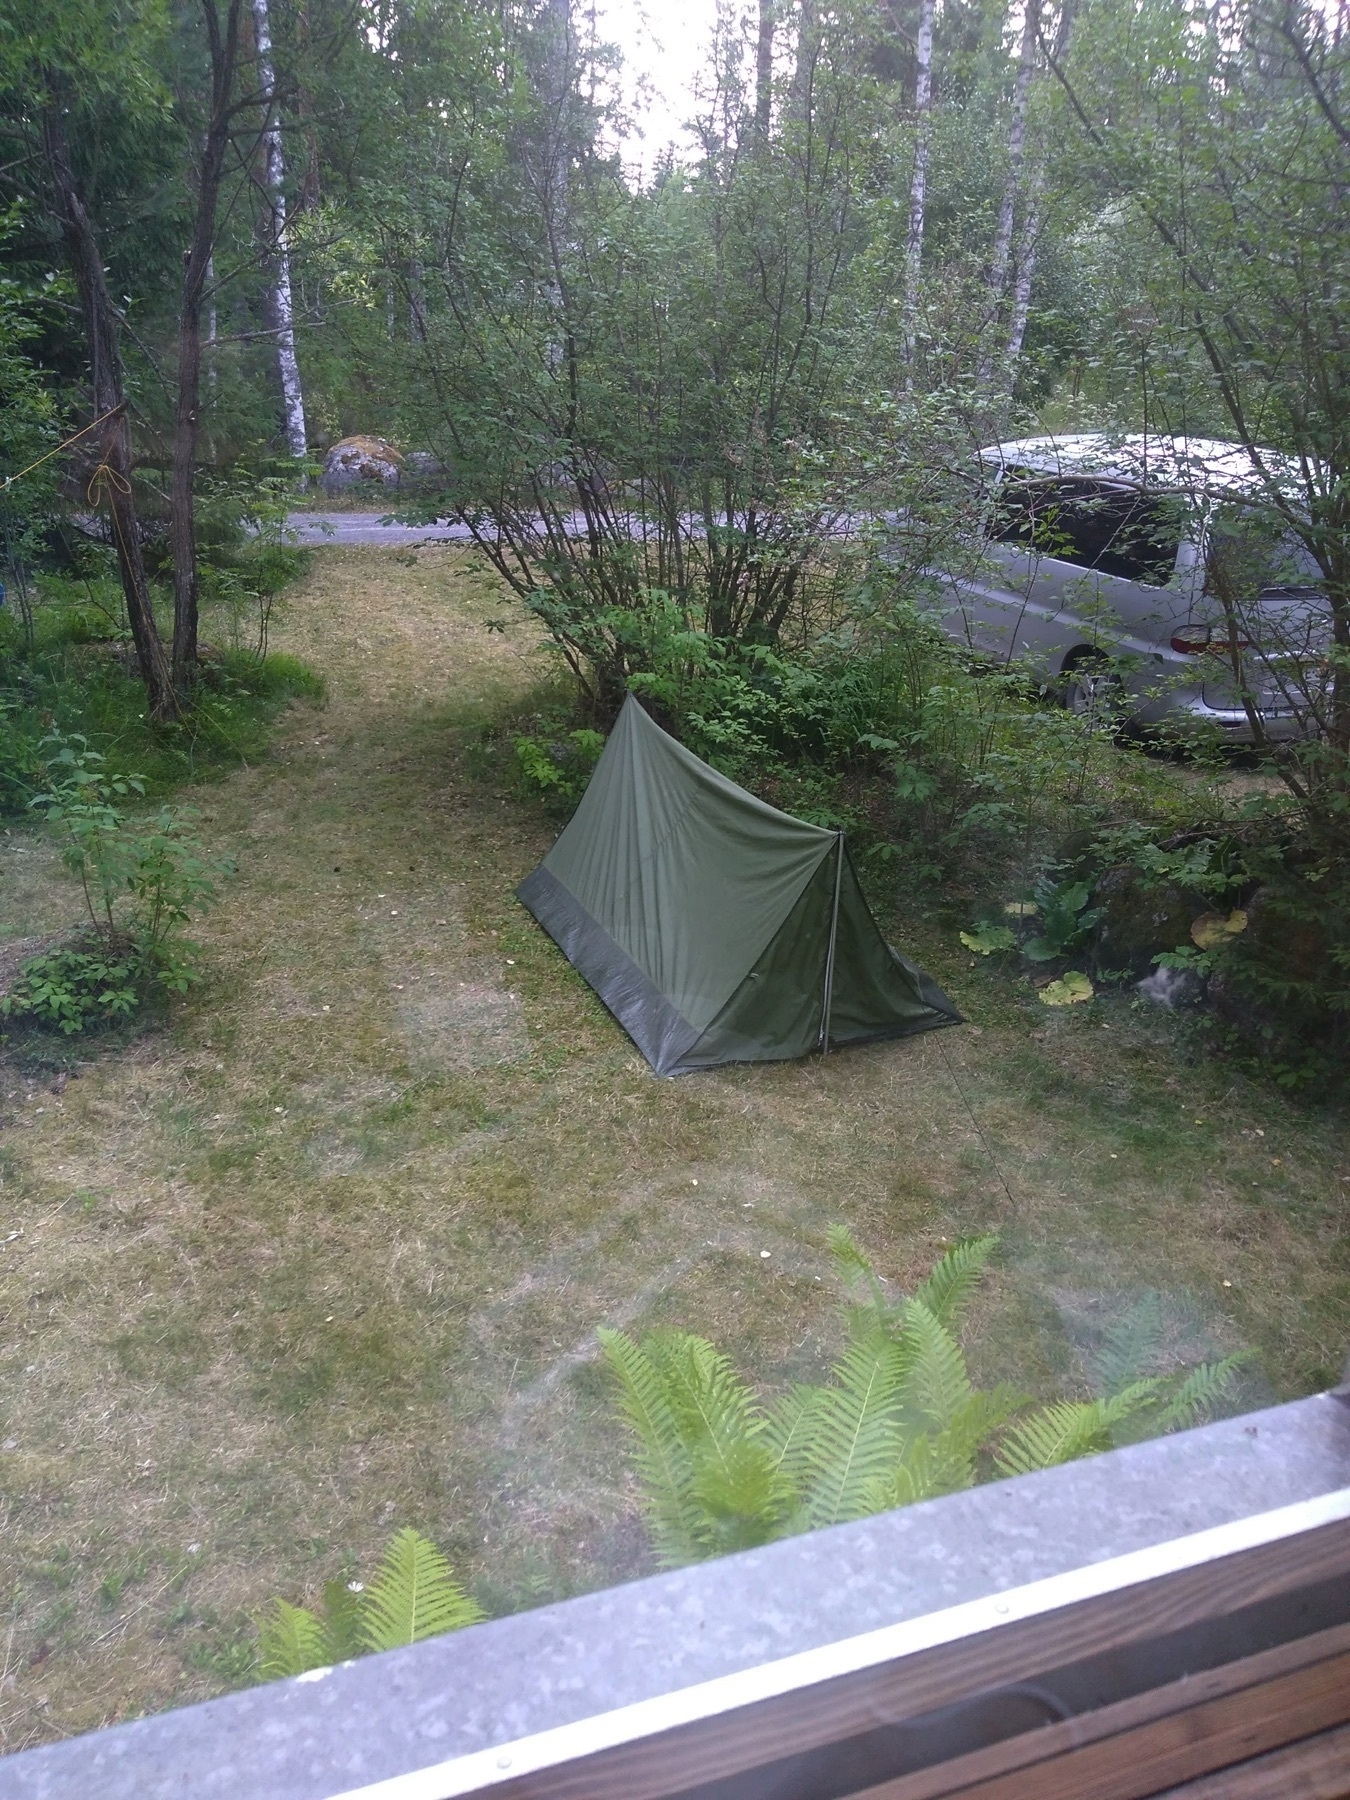 looking out from the window, a tent, a van, grass and some bushes in the garden